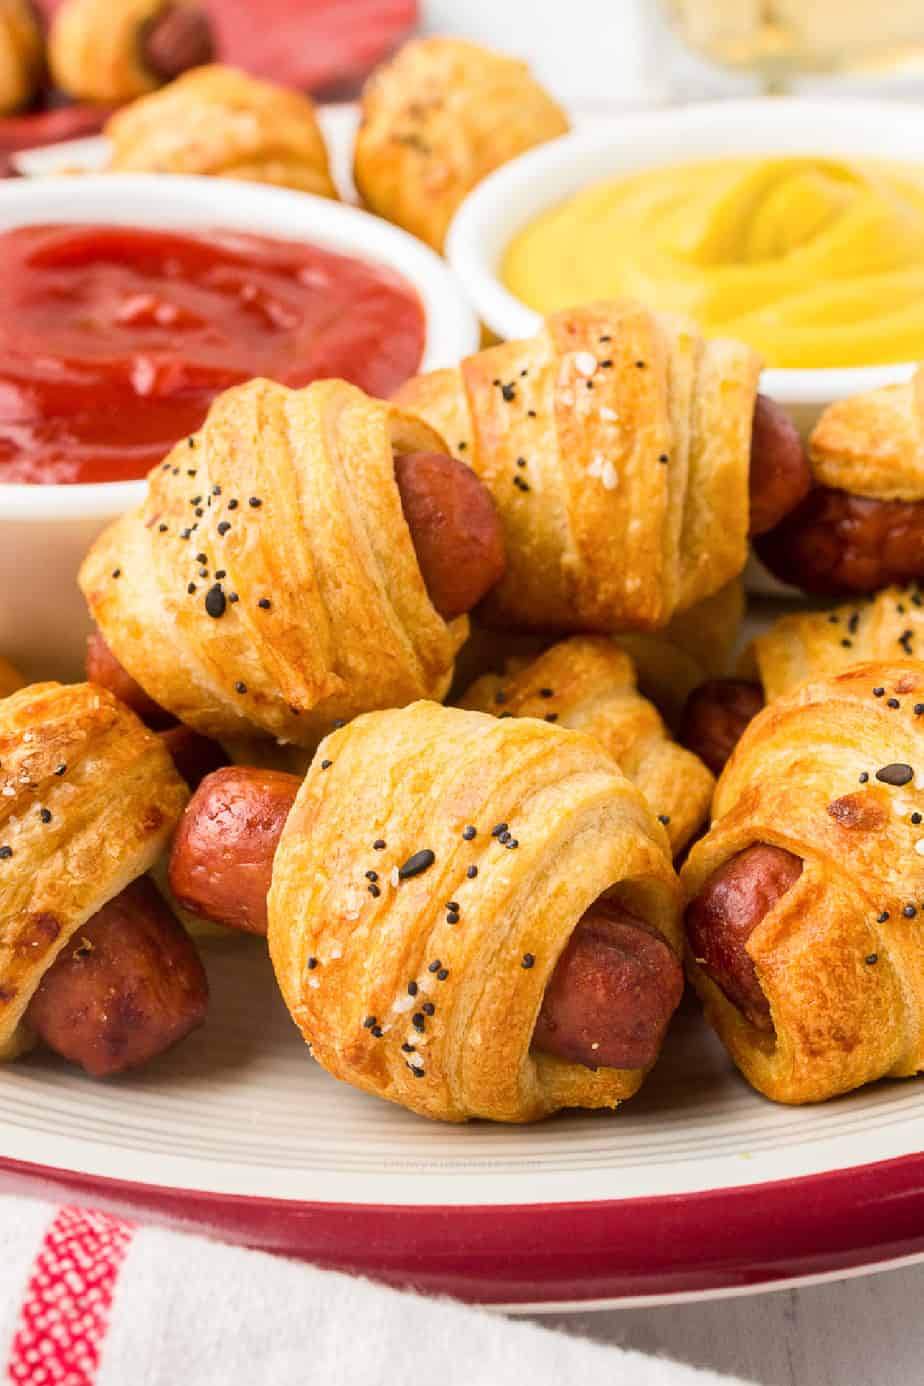 Pigs in a blanket stacked on a plate with dipping sauces in bowls behind